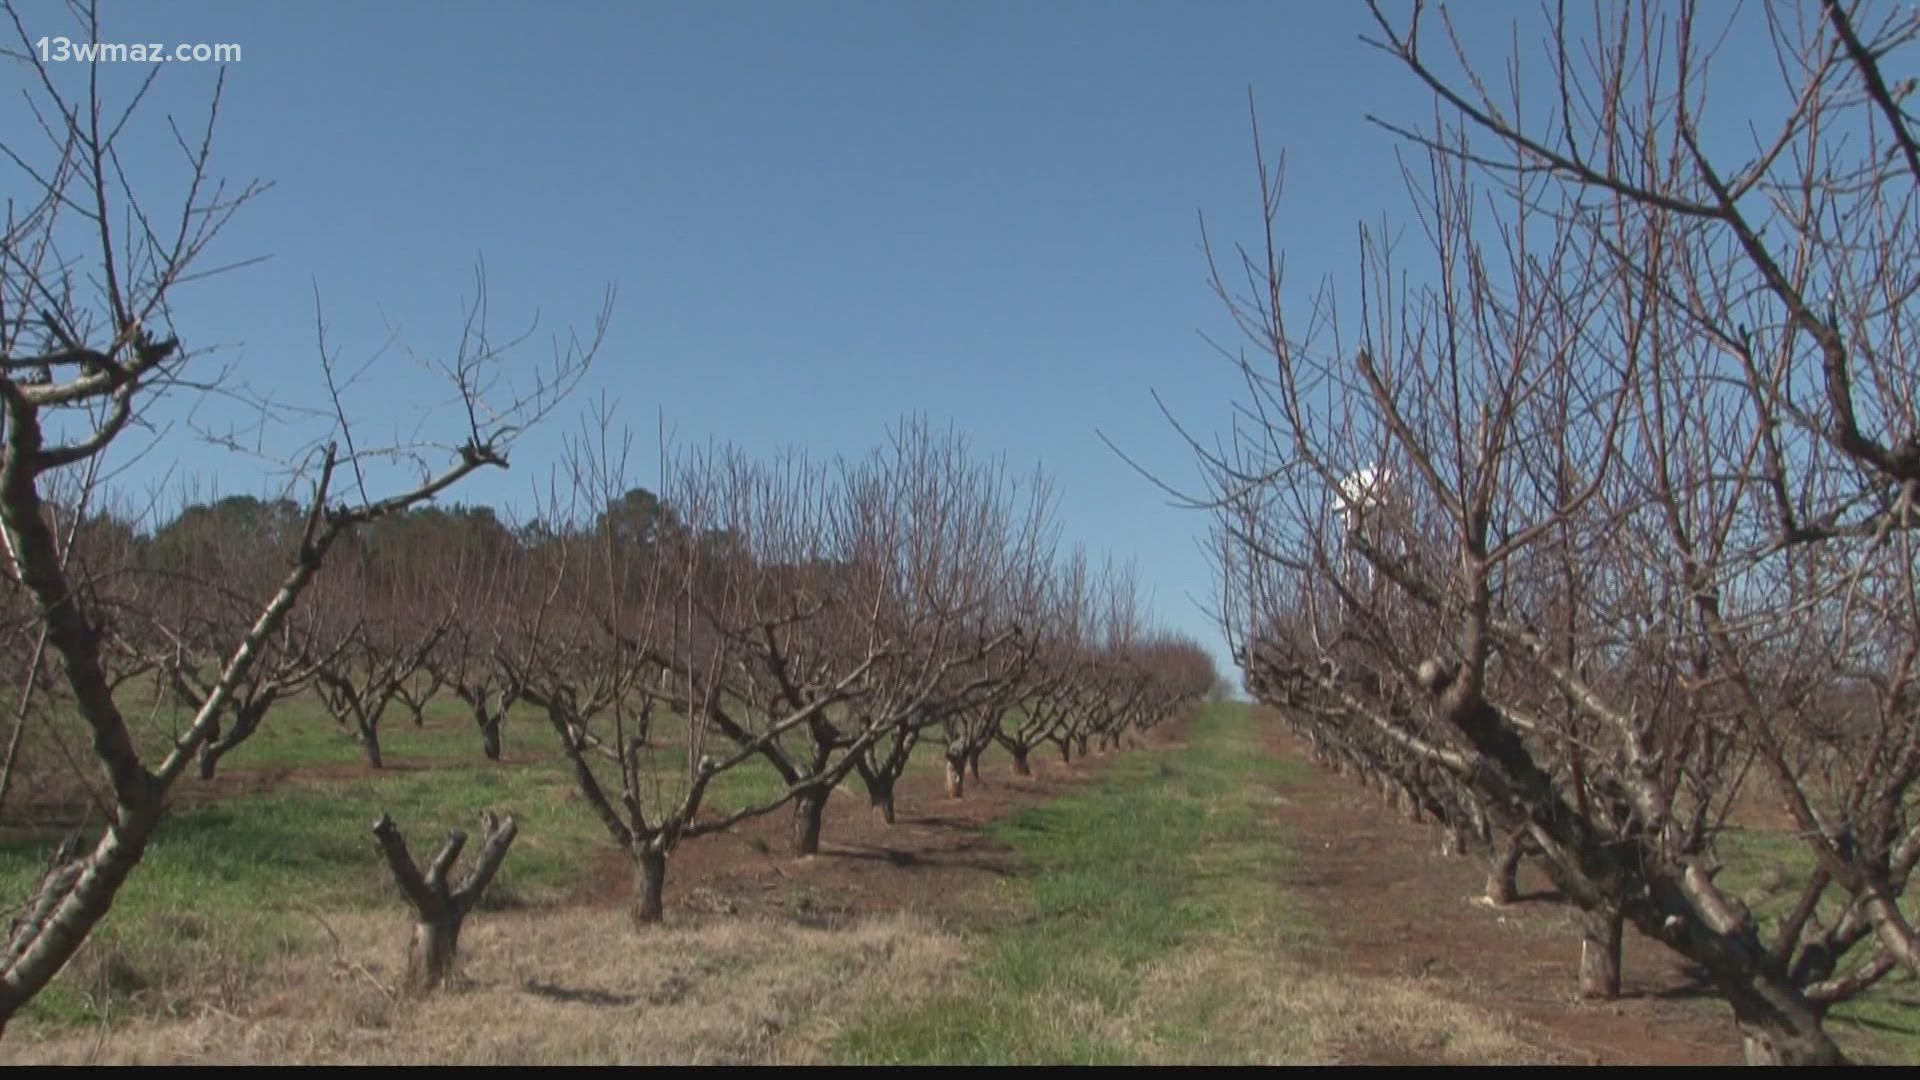 An early freeze could ruin everything if it kills off the buds, which are the beginnings of an early peach.